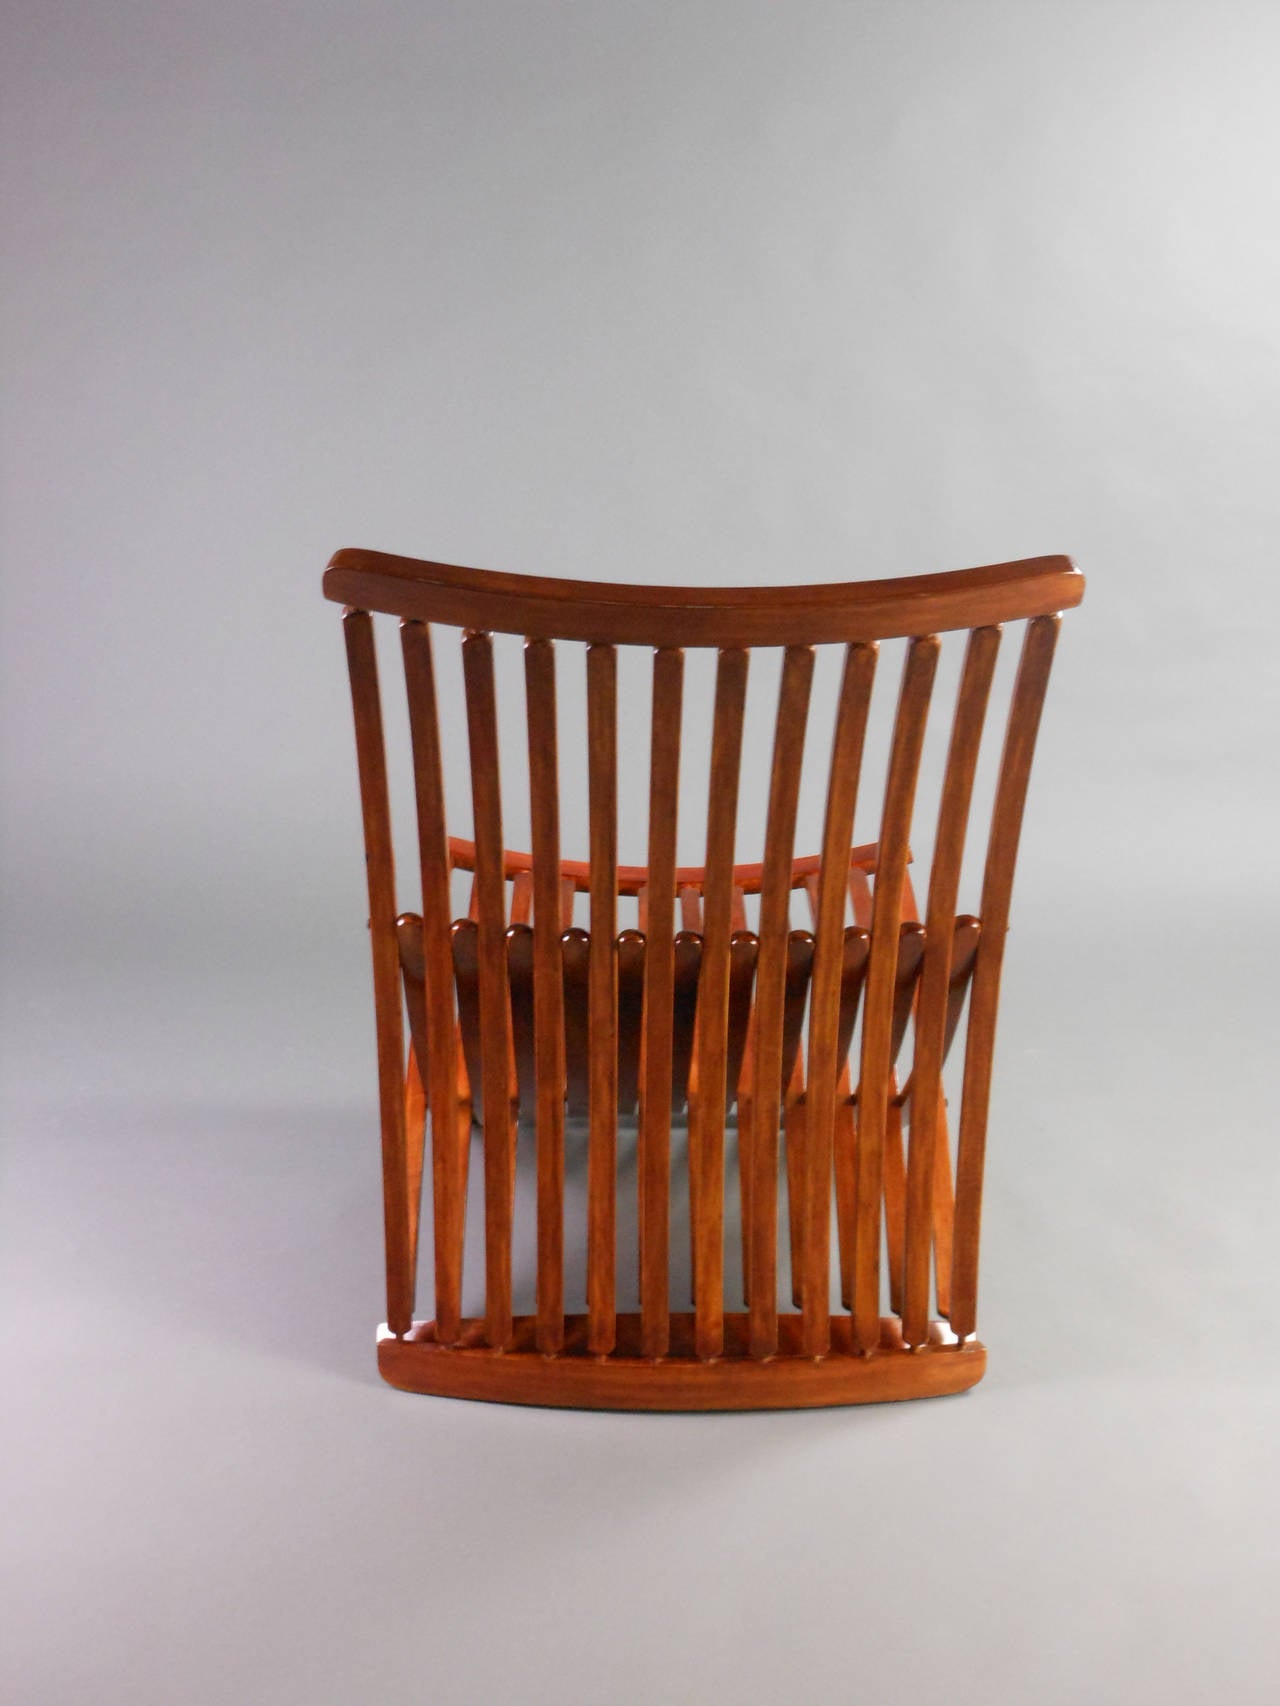 Late 20th Century Canadian Birch Steamer Chairs by Thomas Lamb, circa 1970 For Sale